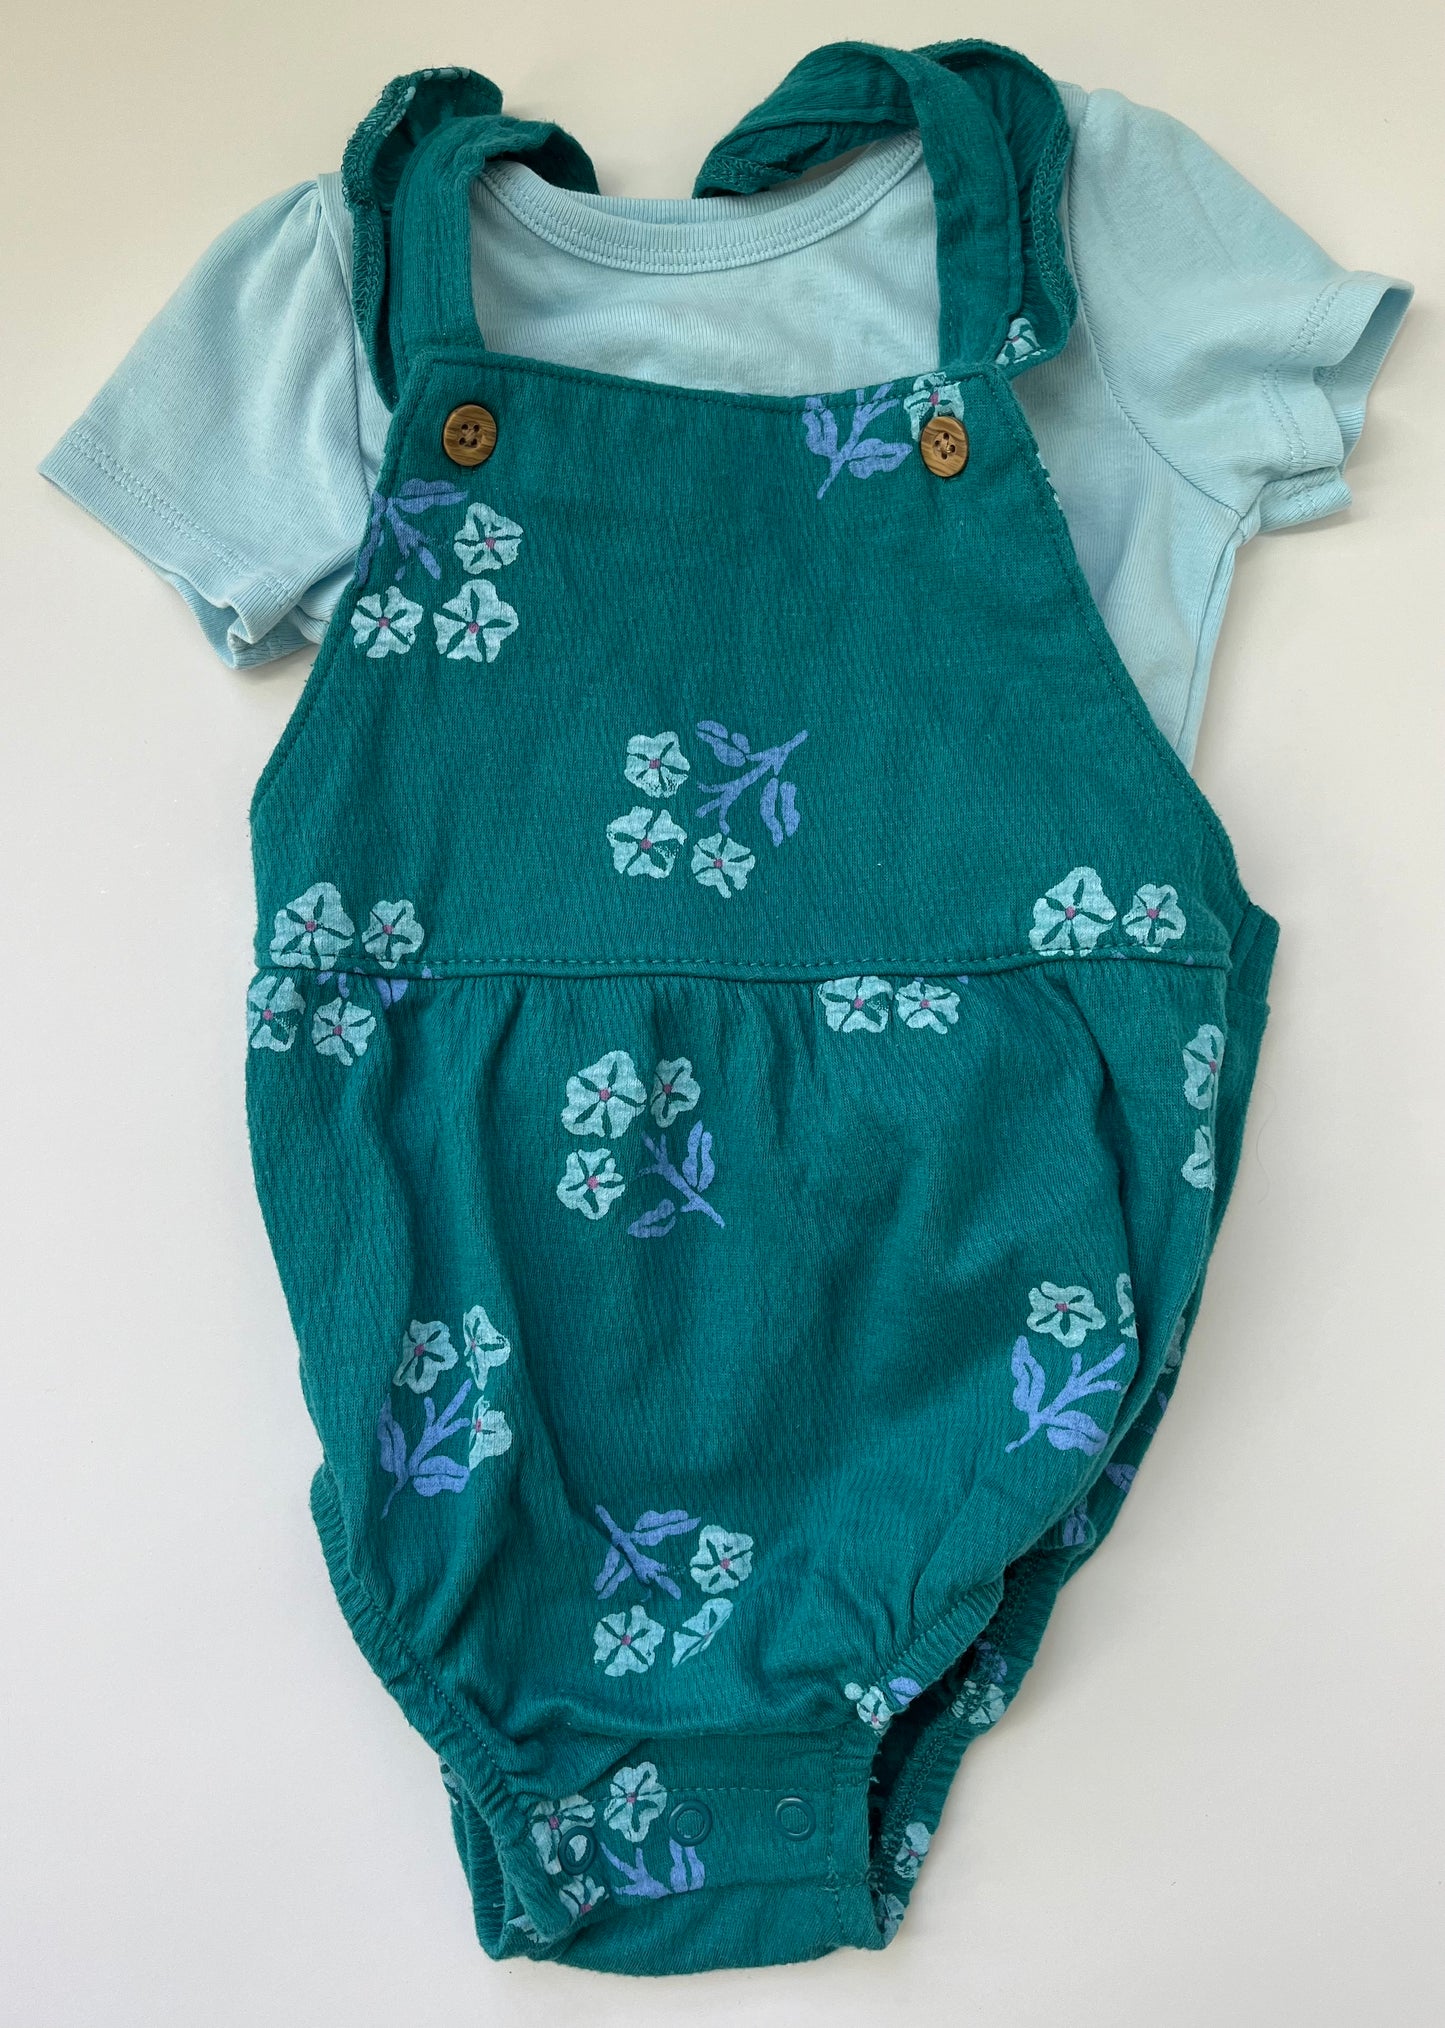 Girls 18 months romper outfit (45244)